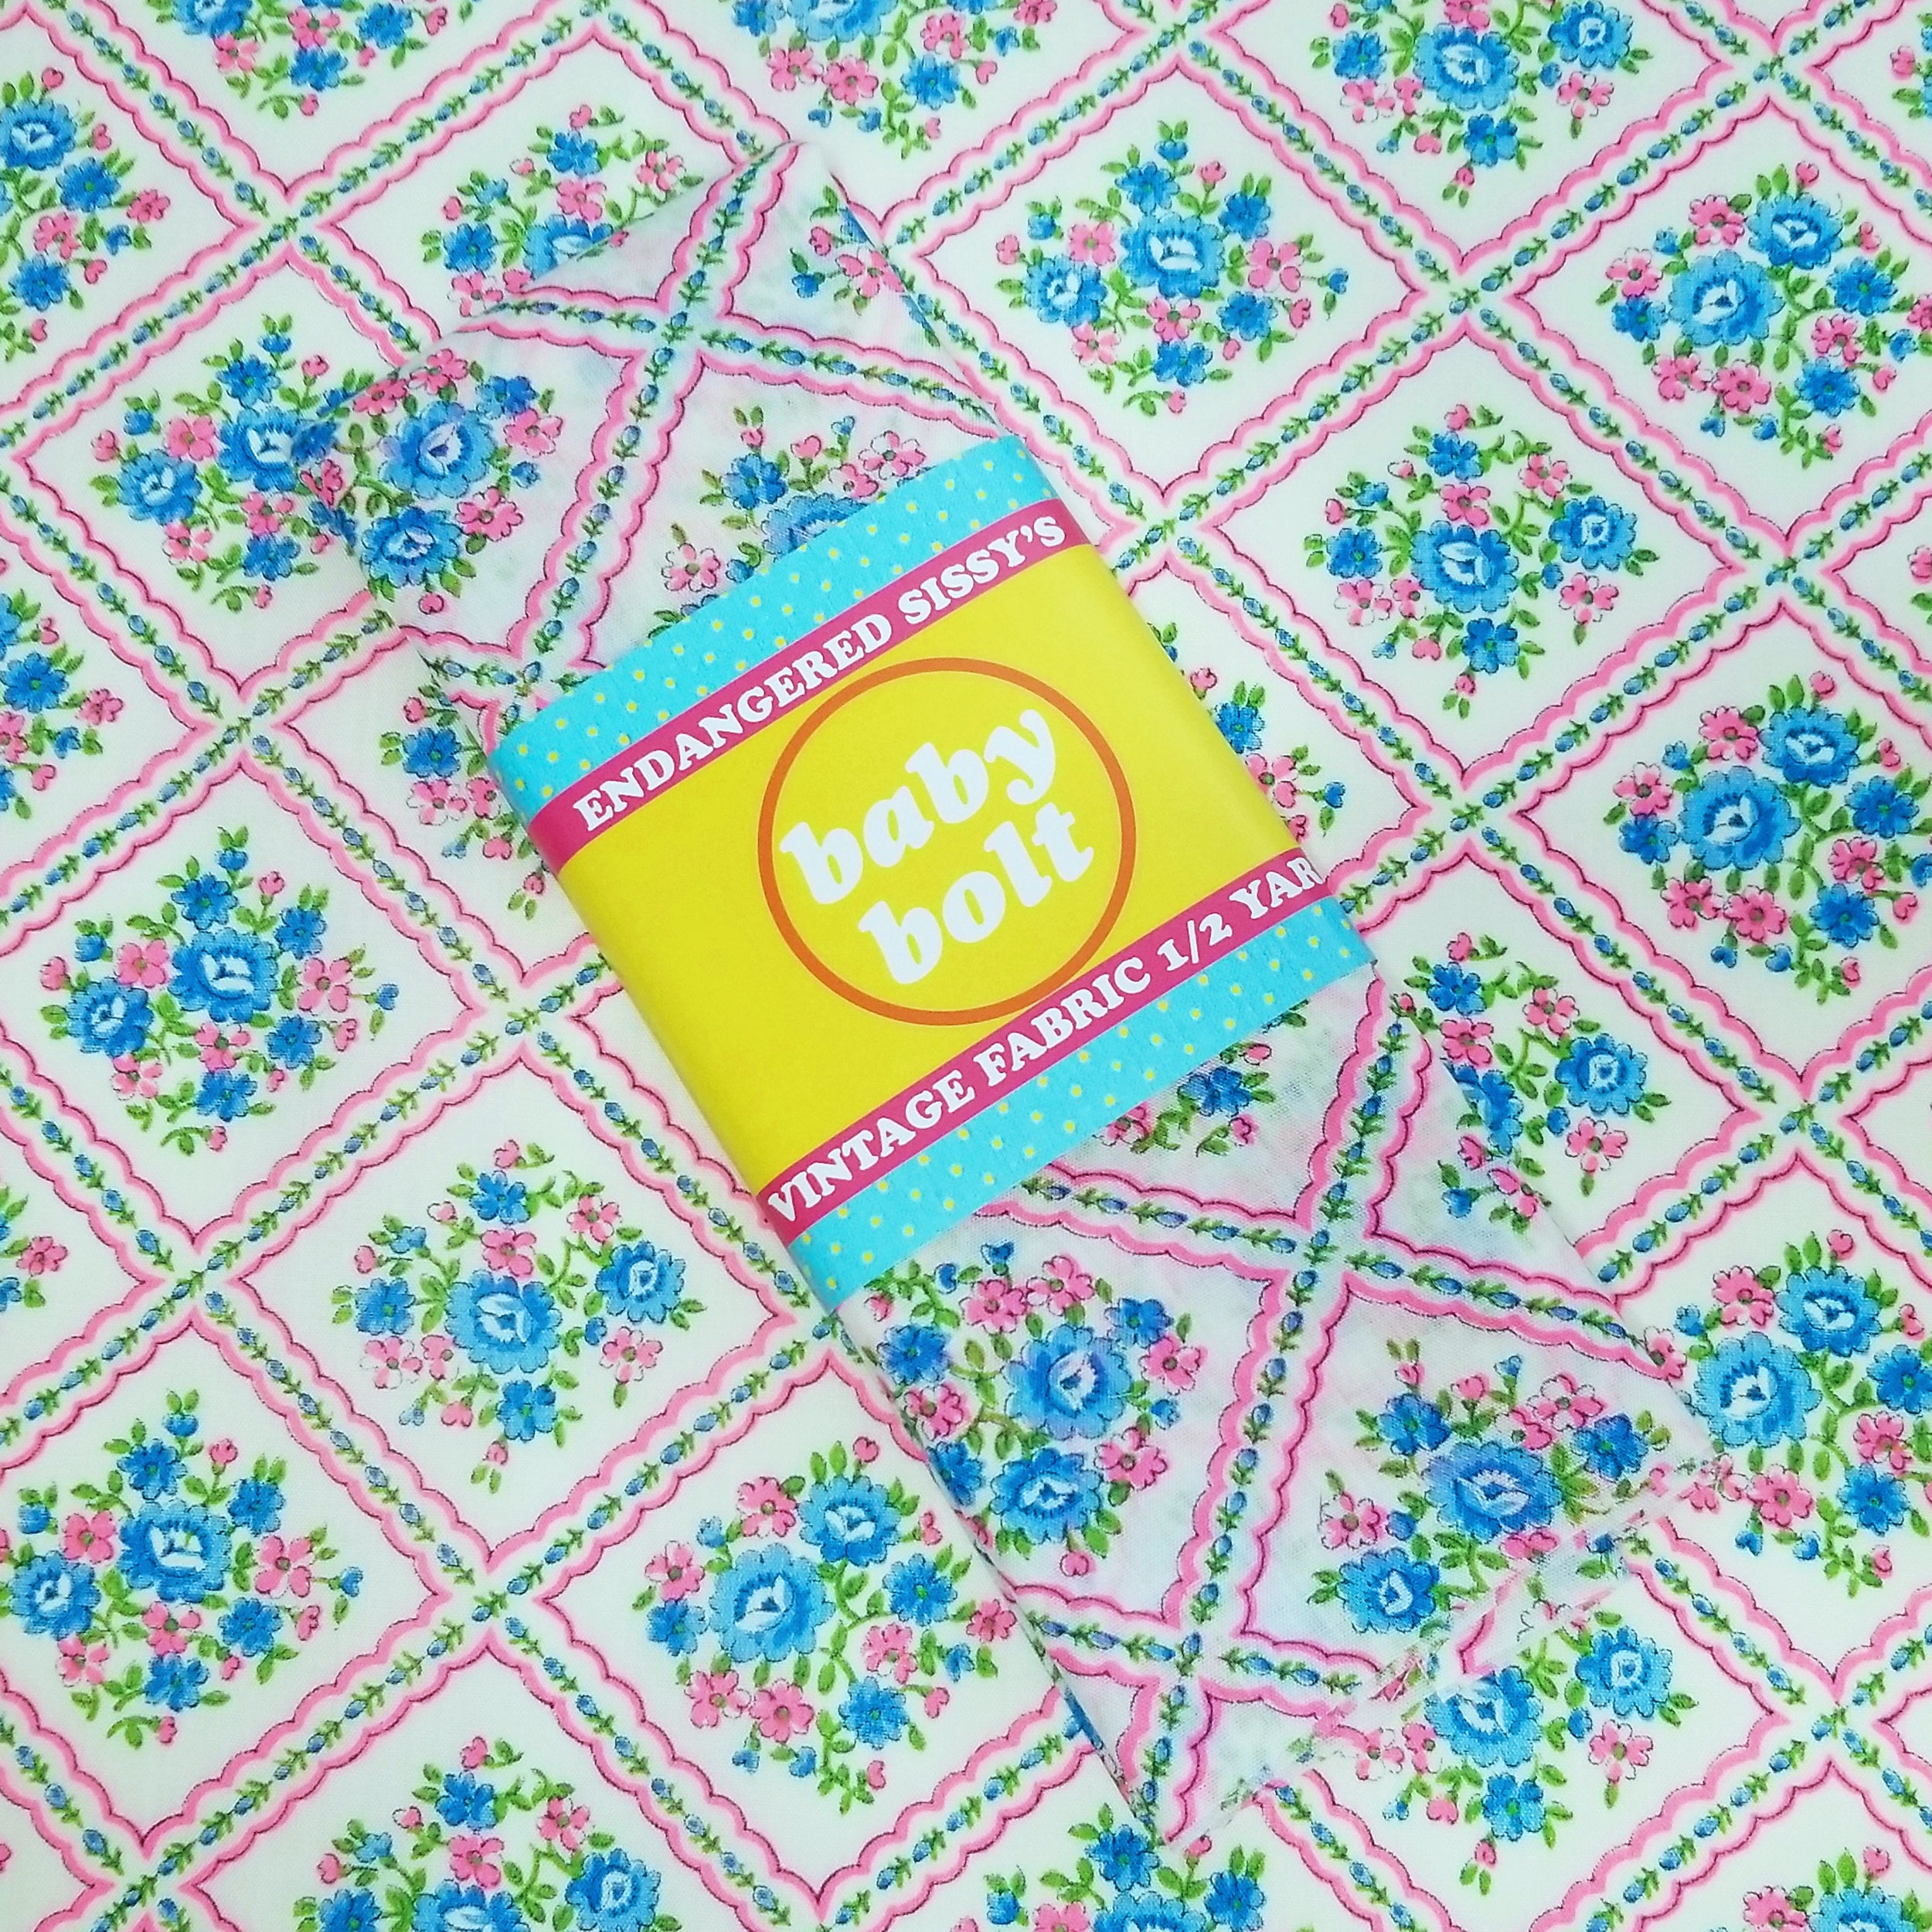 VINTAGE FABRIC BABY BOLT HALF-YARD - CUTE FAUX PATCHWORK & FLOWERS PRINT IN BLUE, GREEN & NEON PINK ON WHITE